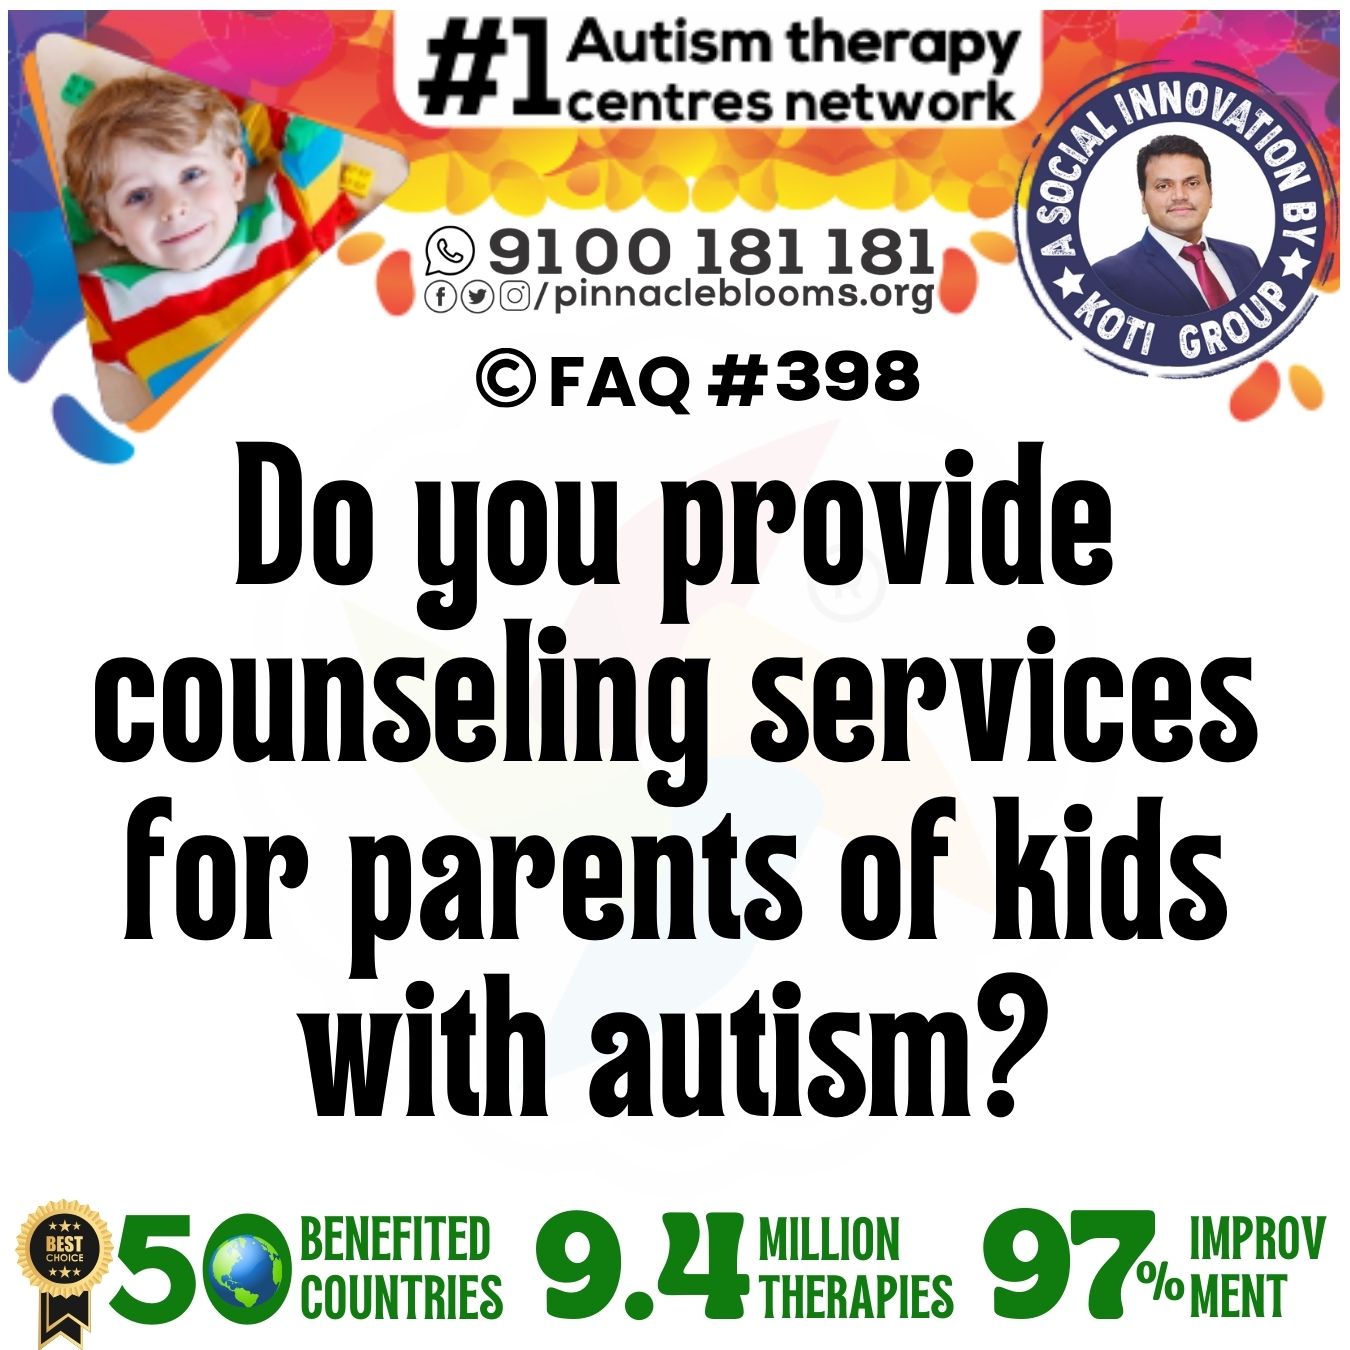 Do you provide counseling services for parents of kids with autism?